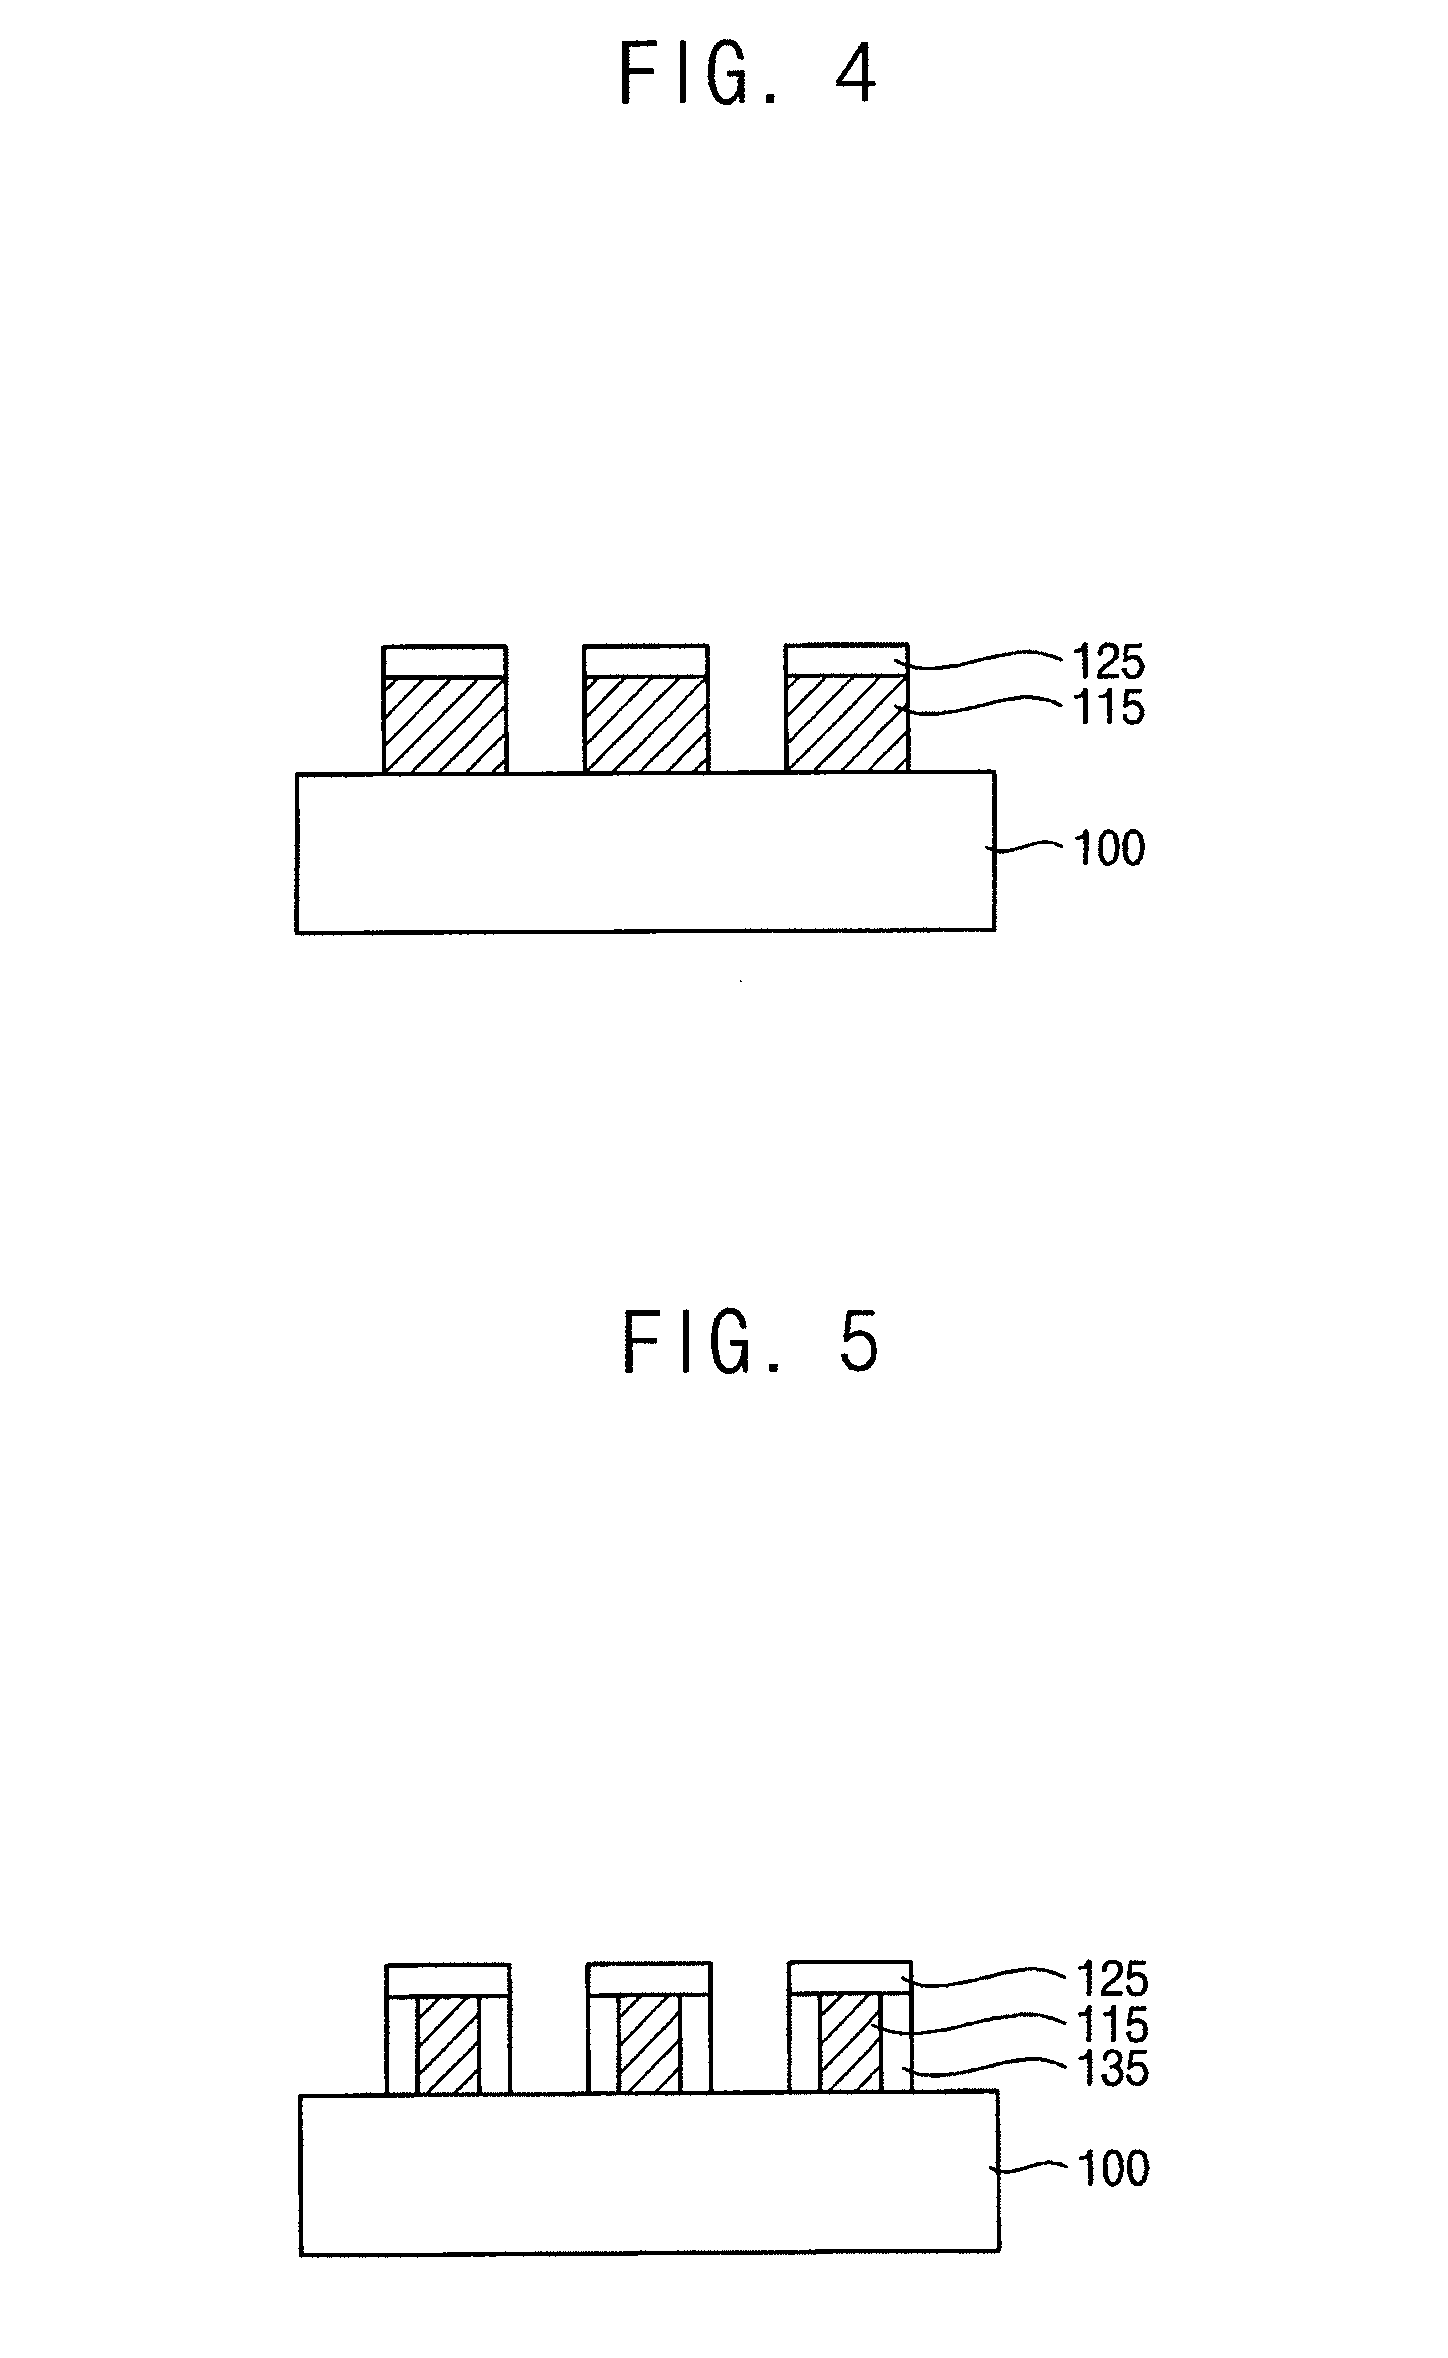 Photomasks and methods of manufacturing the same